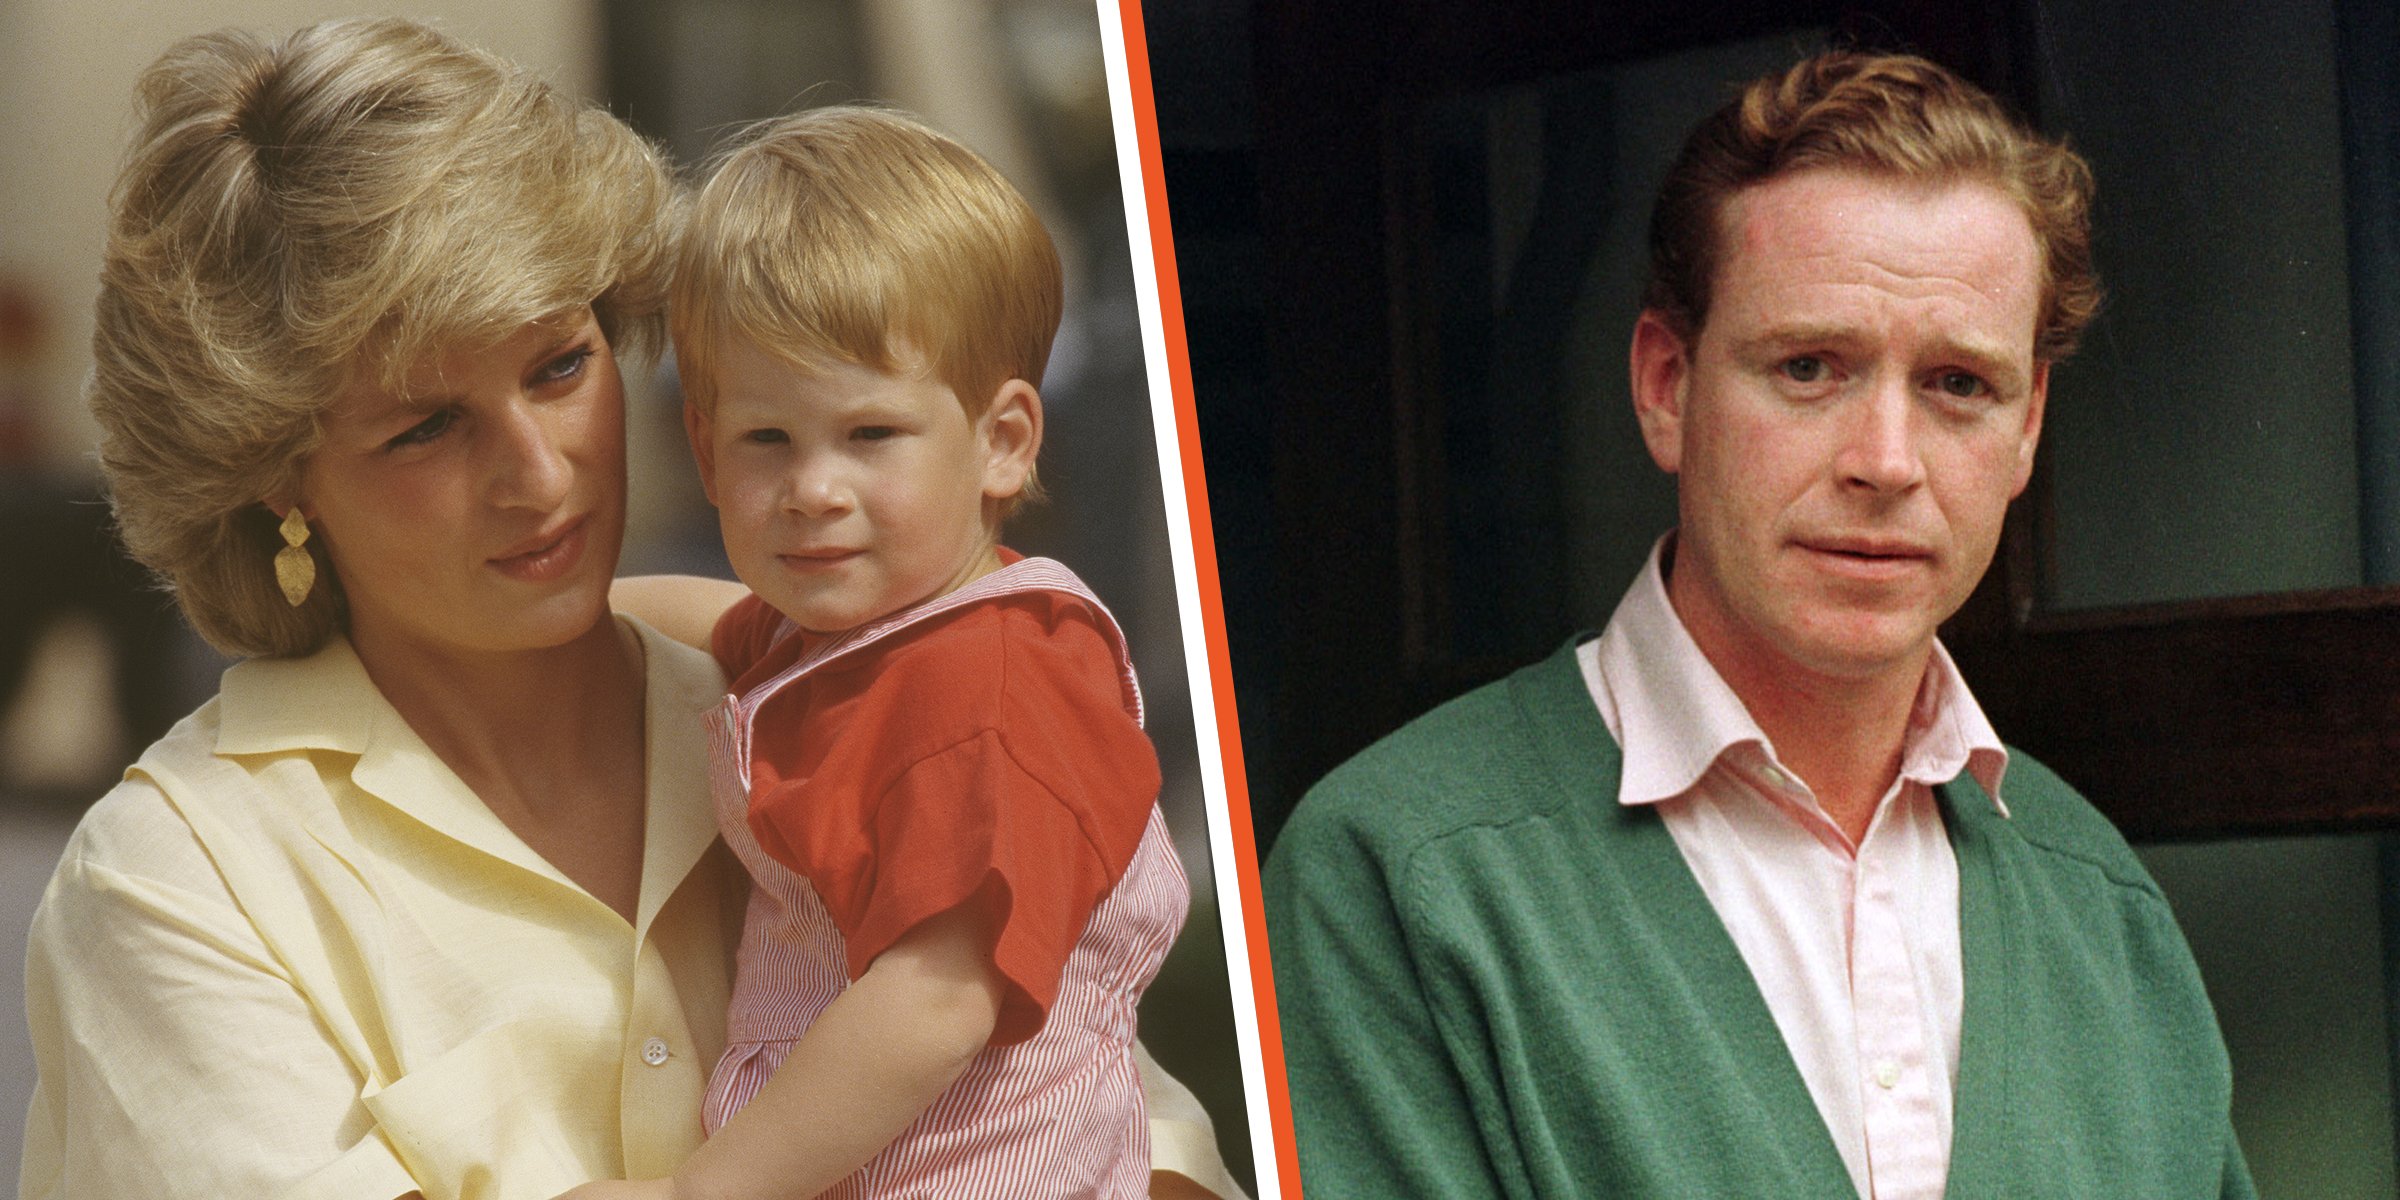 Lady Diana Spencer and Prince Harry | Captain James Hewitt | Source: Getty Images